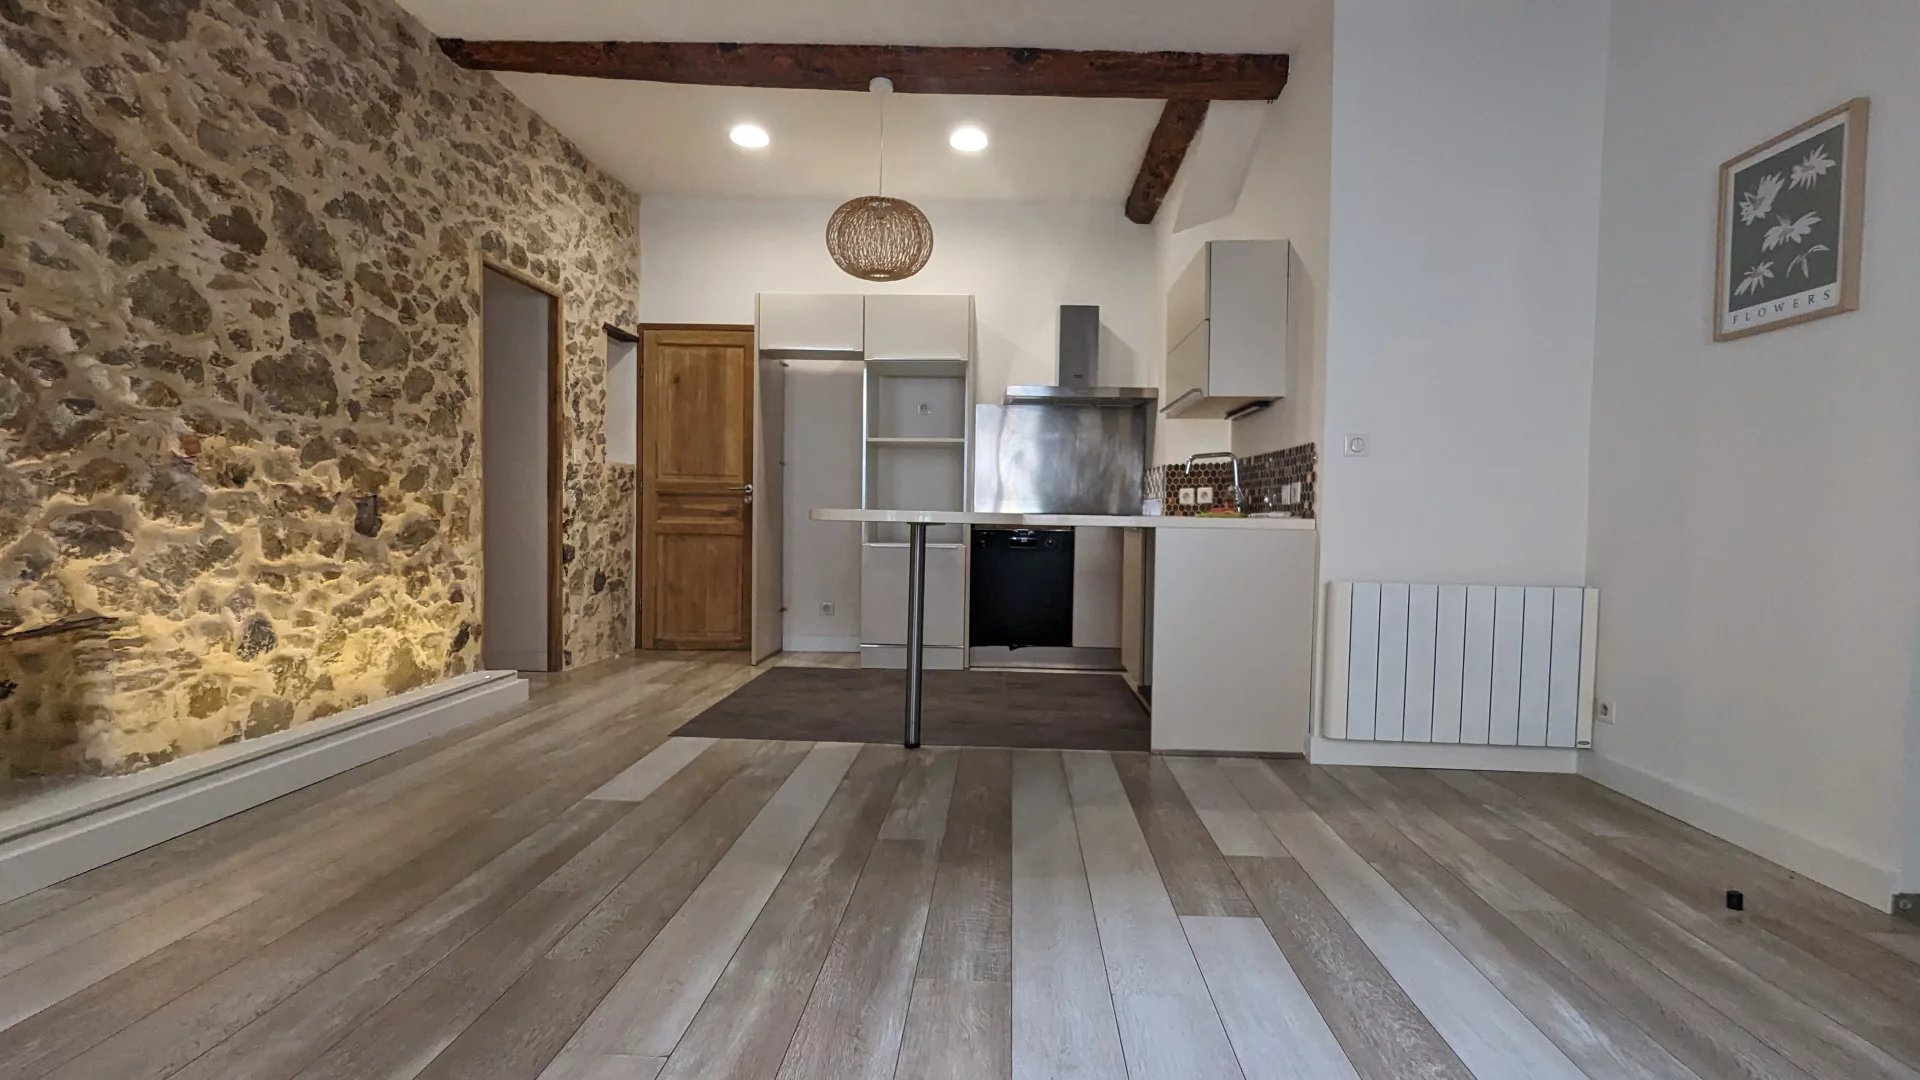 3-ROOM FLAT ANTIBES/OLD TOWN